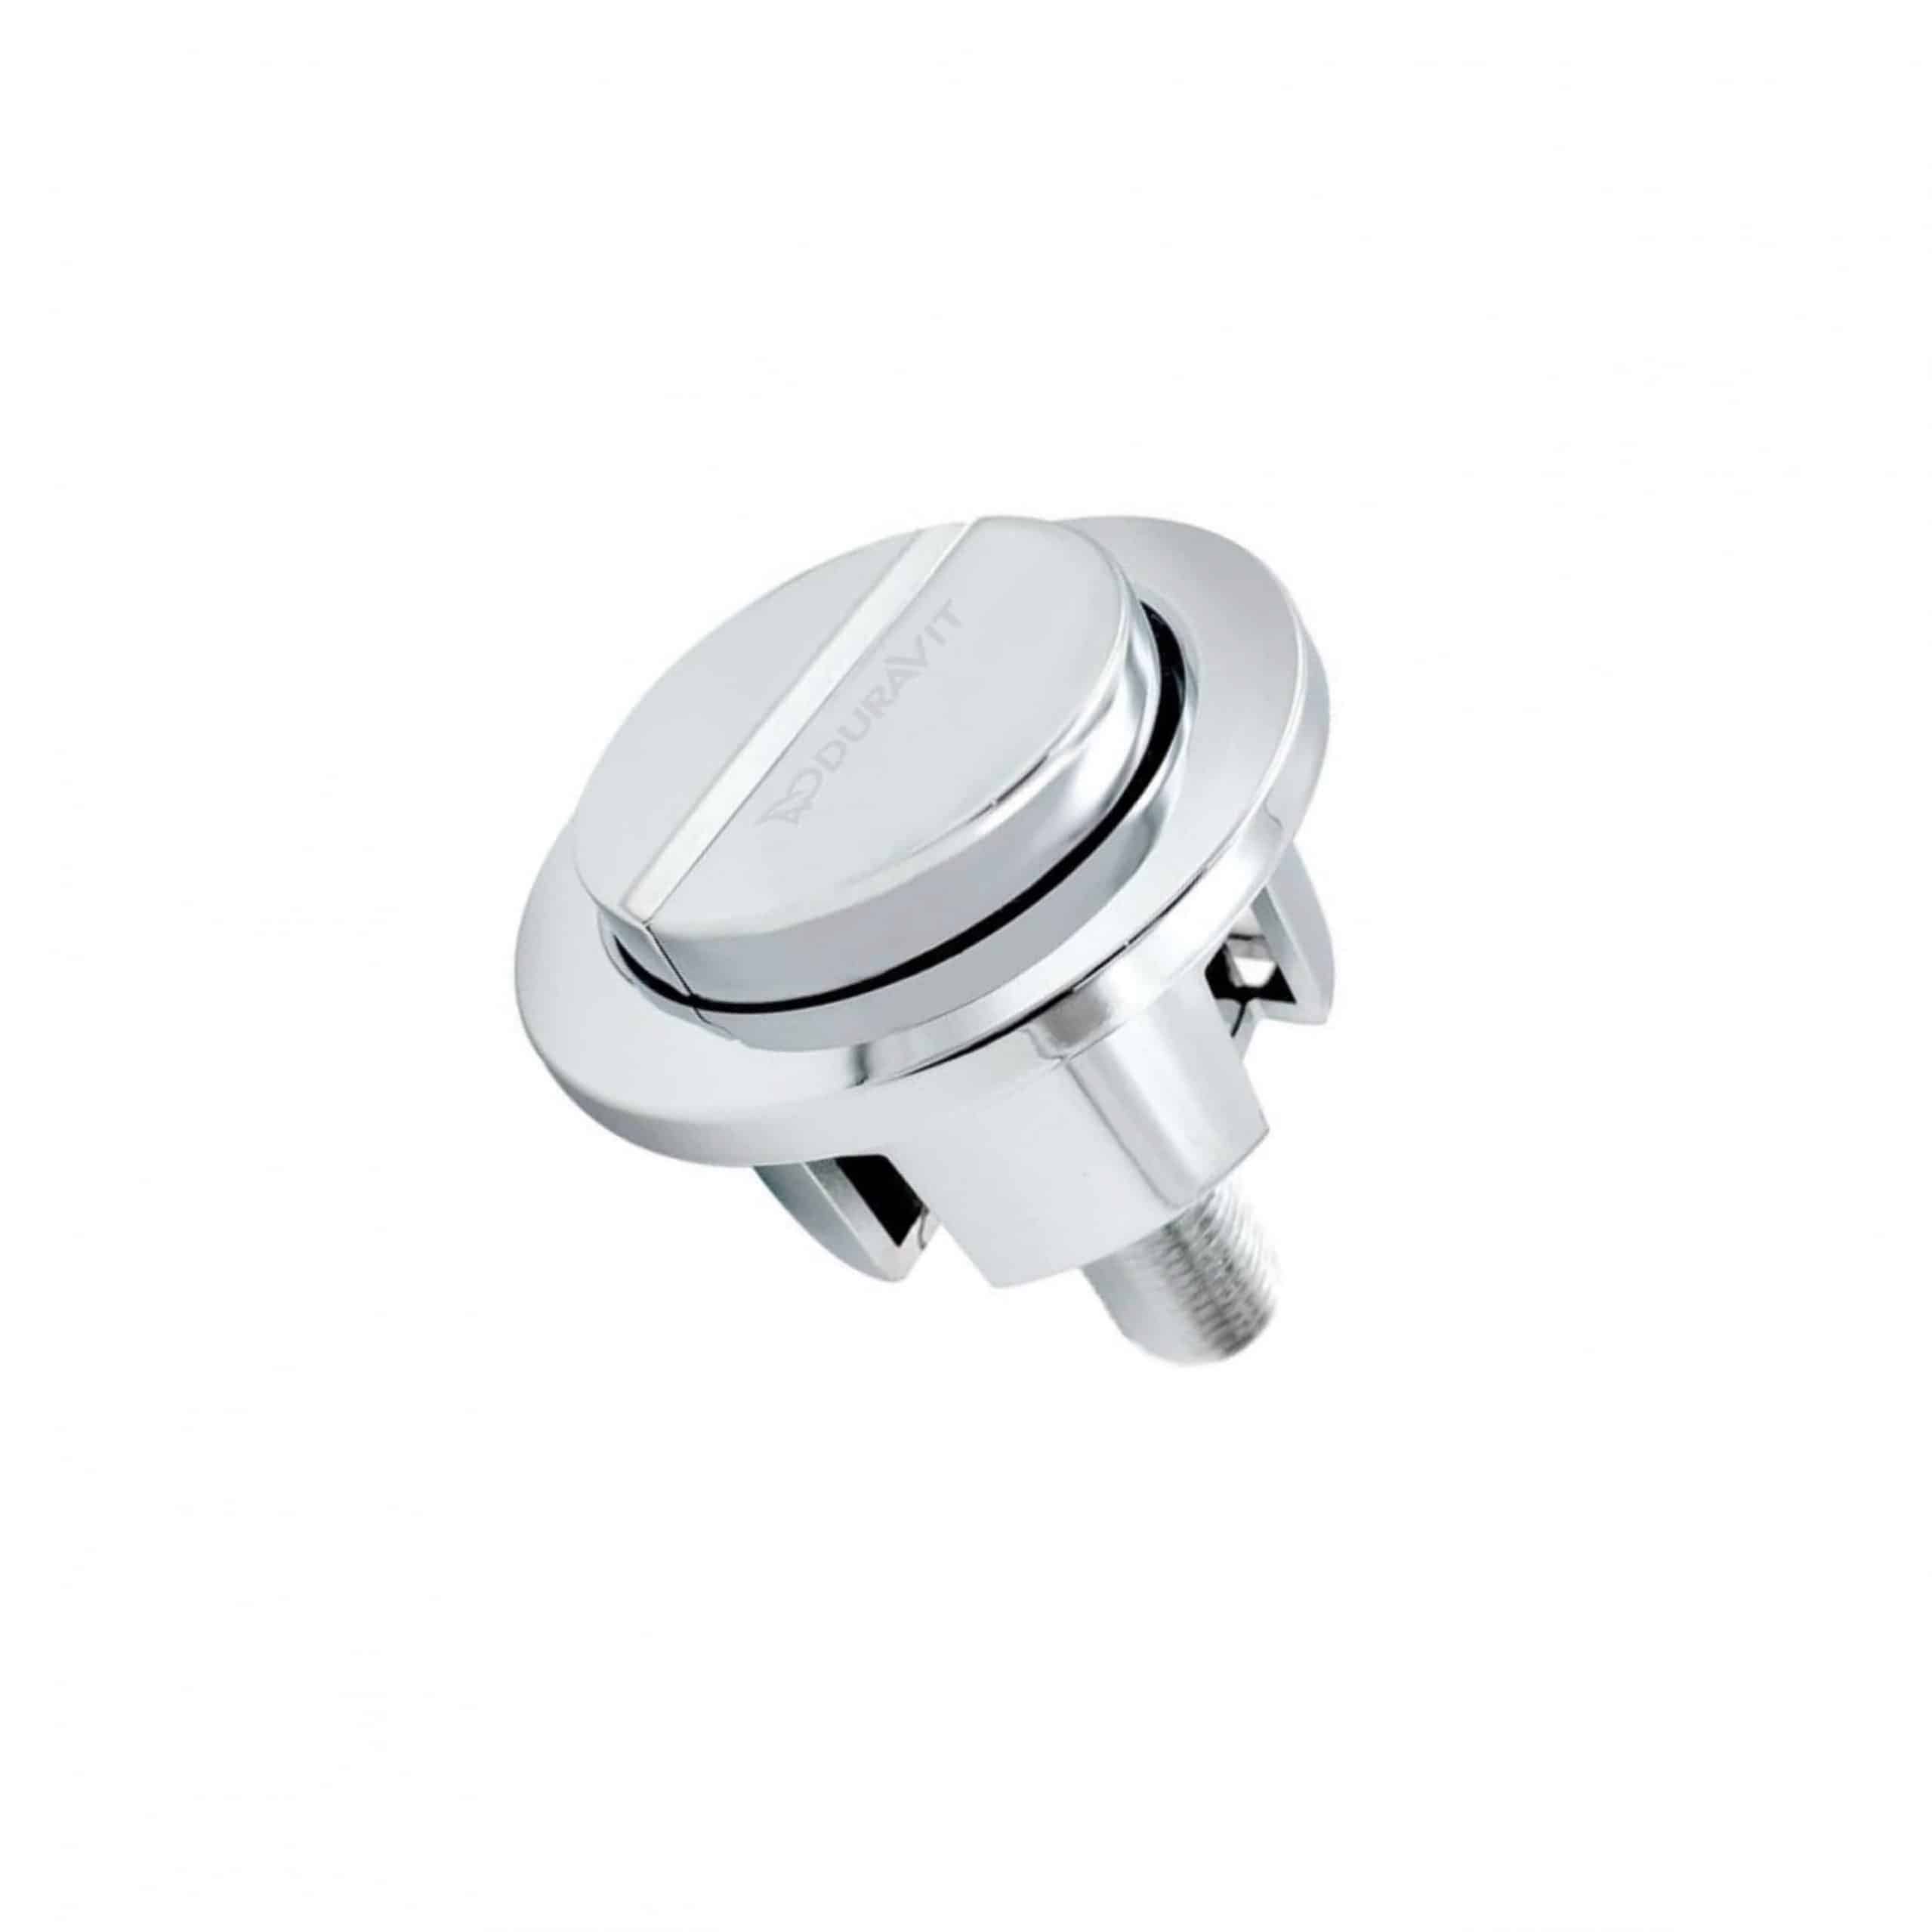 Geberit Duravit Replacement Type 290 Dual Flush Push Button Chrome 0074611000 by Geberit 